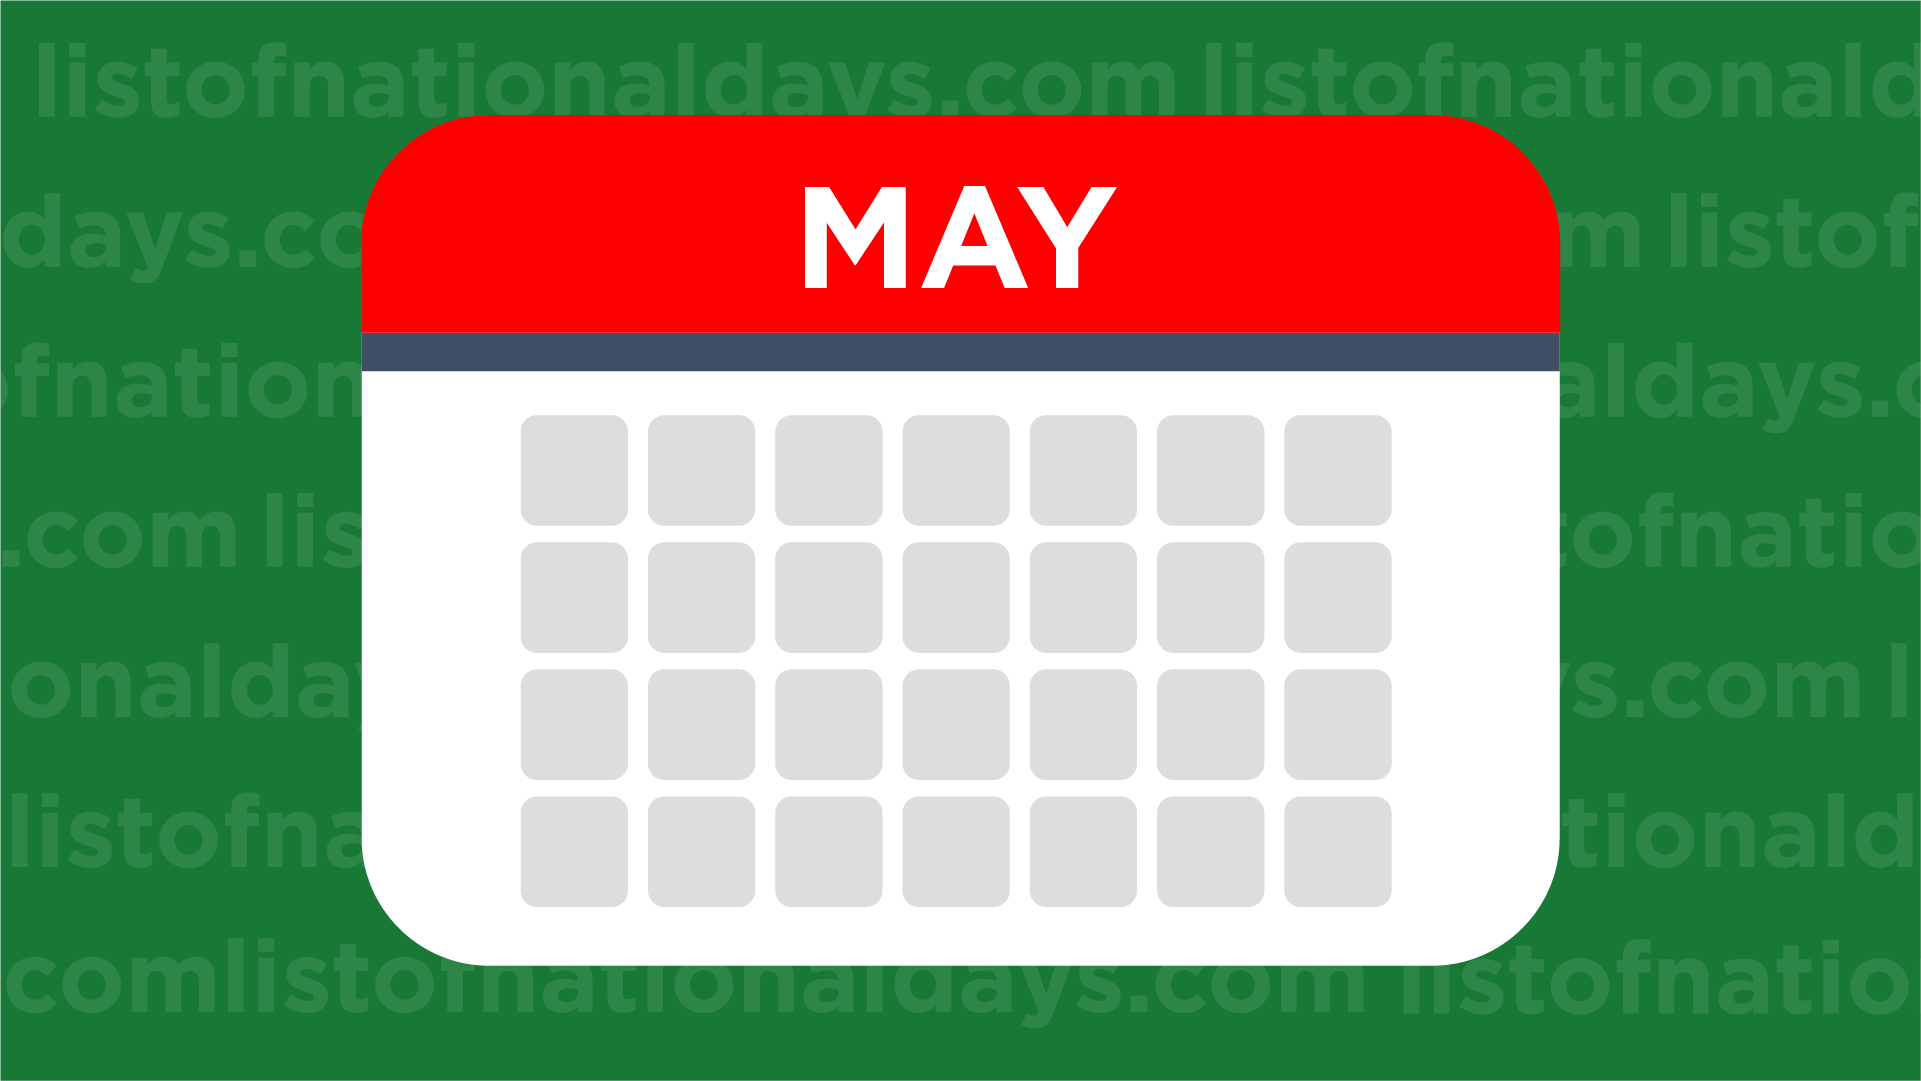 NATIONAL TWILIGHT ZONE DAY - May 11 - National Day Calendar